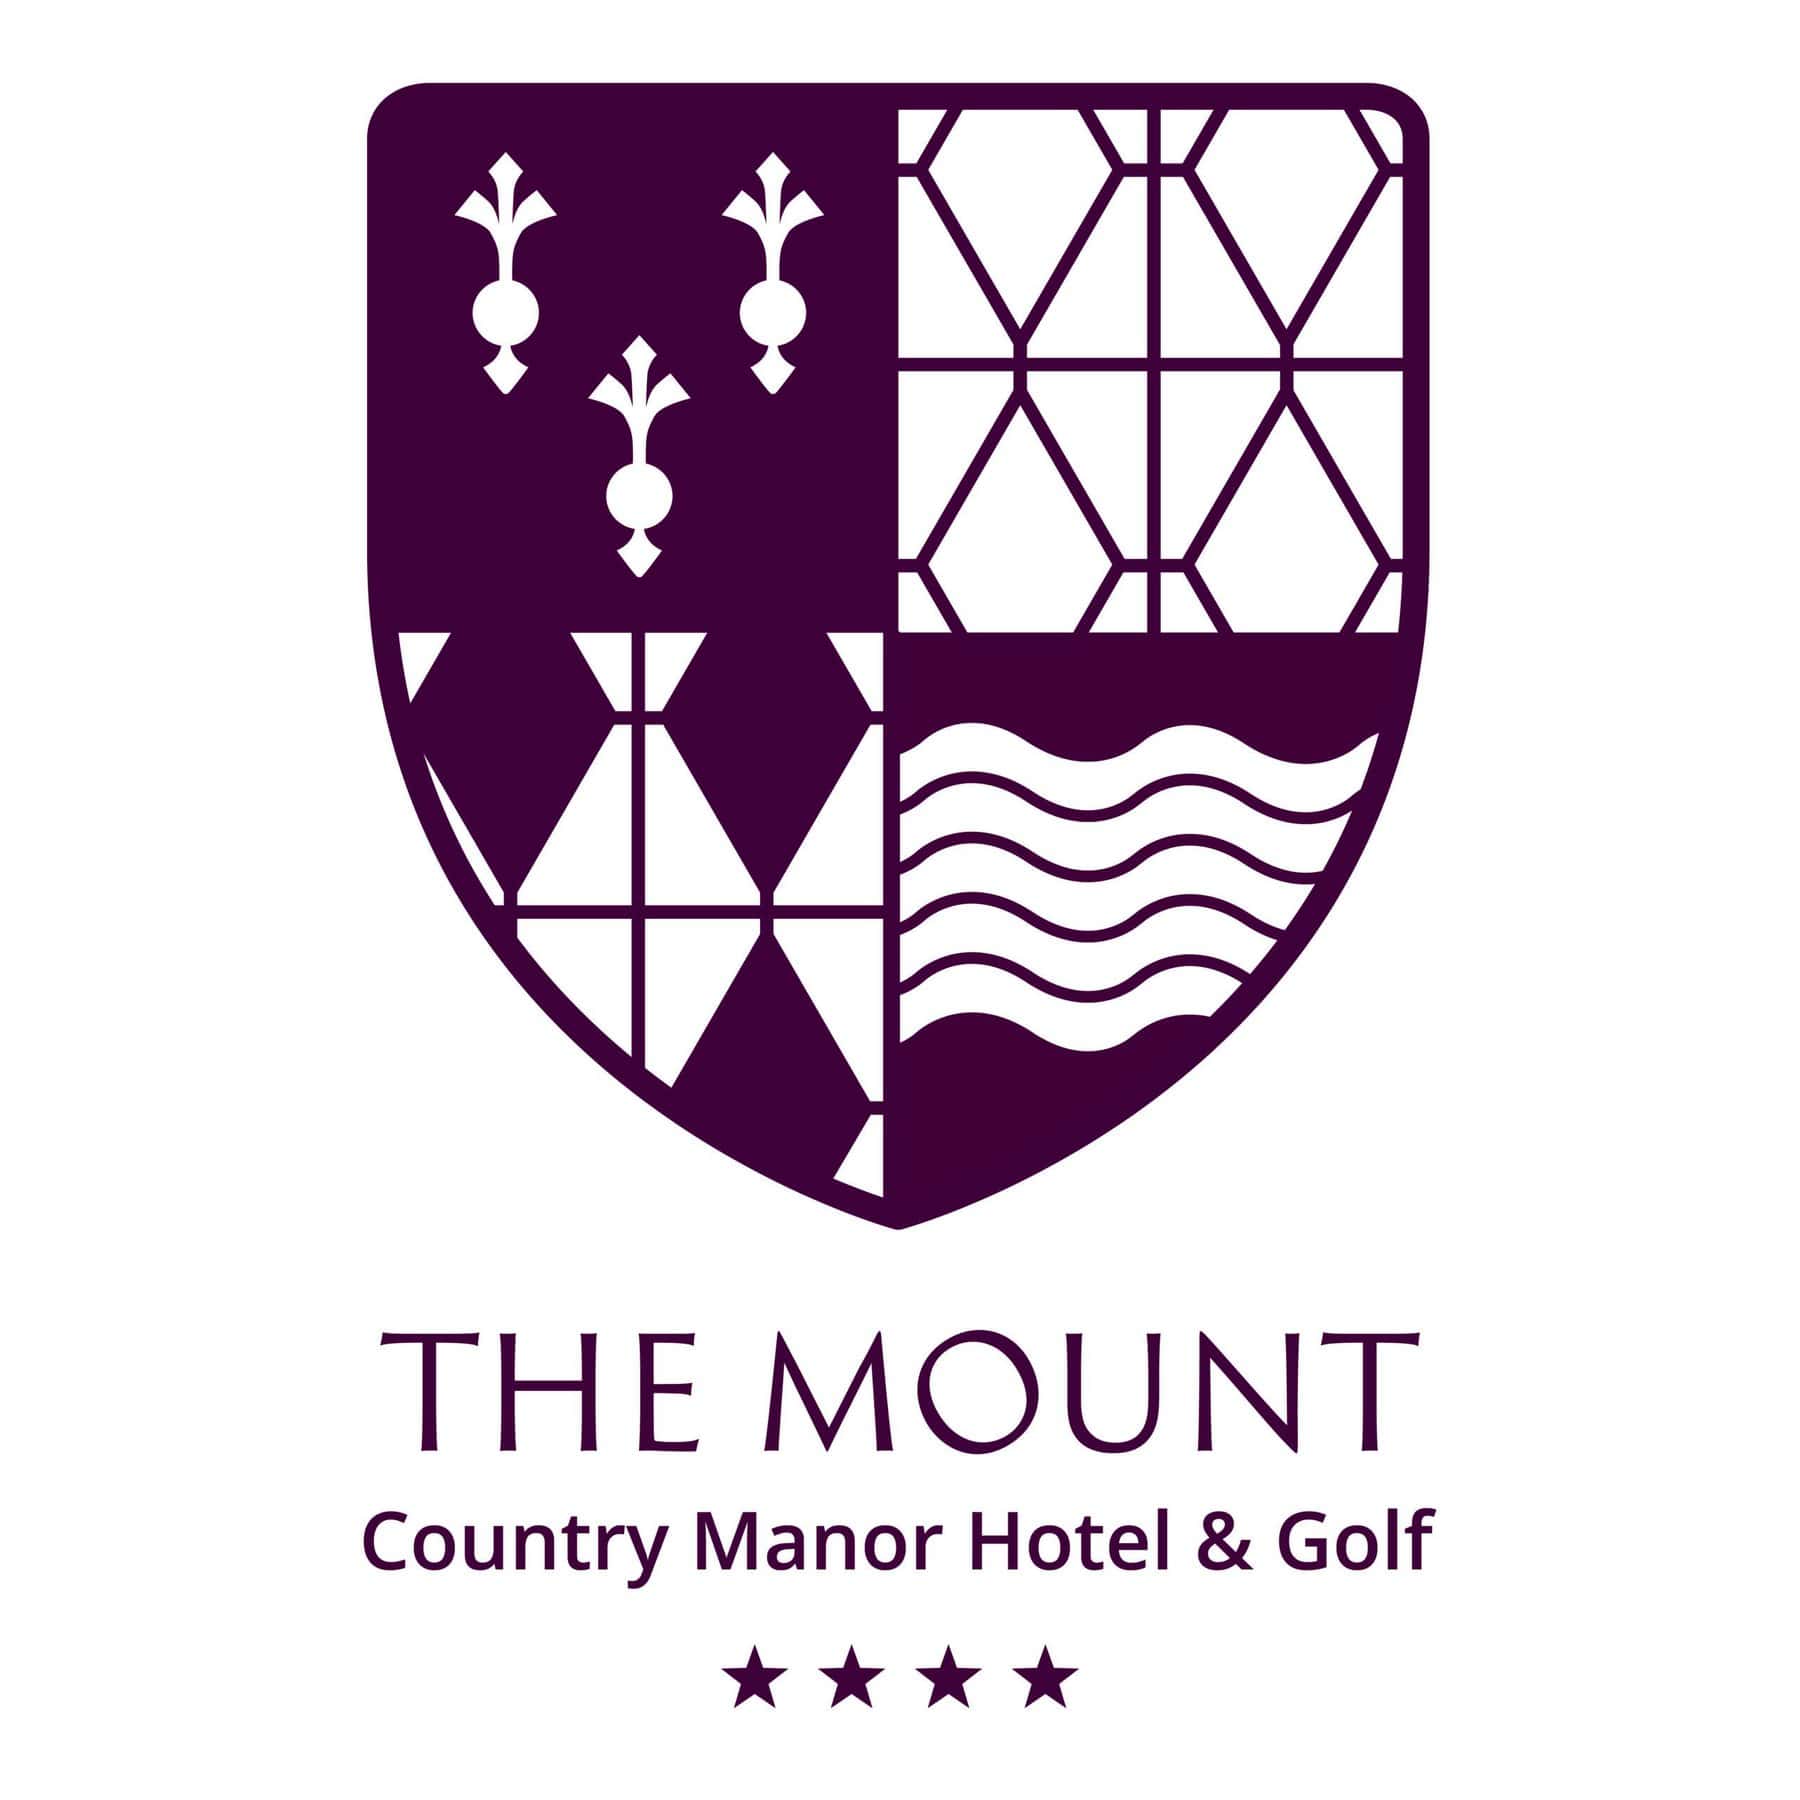 The Mount Hotel